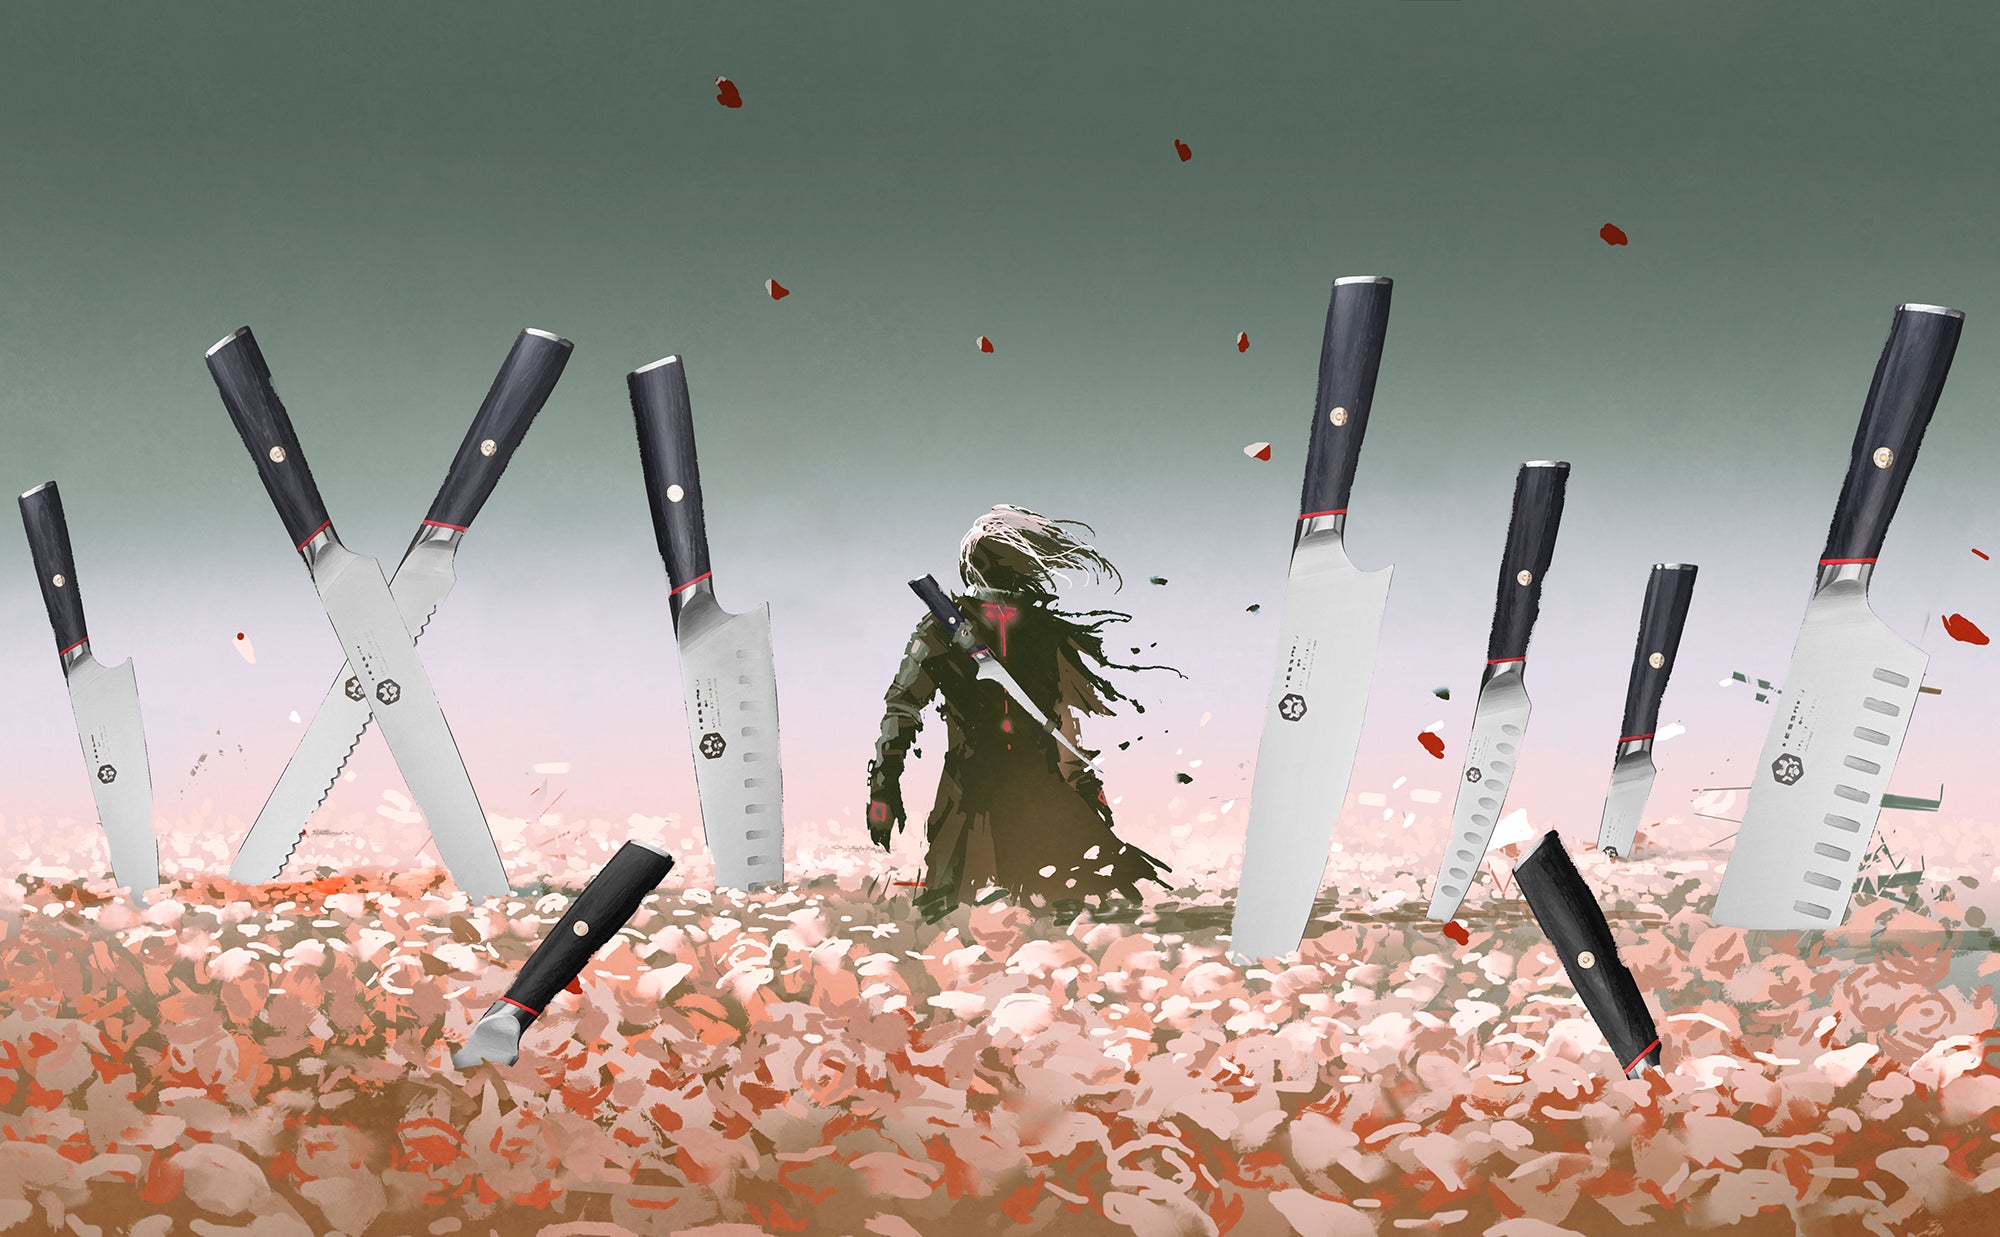 An illustration of a Samurai warrior in a cherry blossom covered field with the Spectre Series Knives piercing the ground.